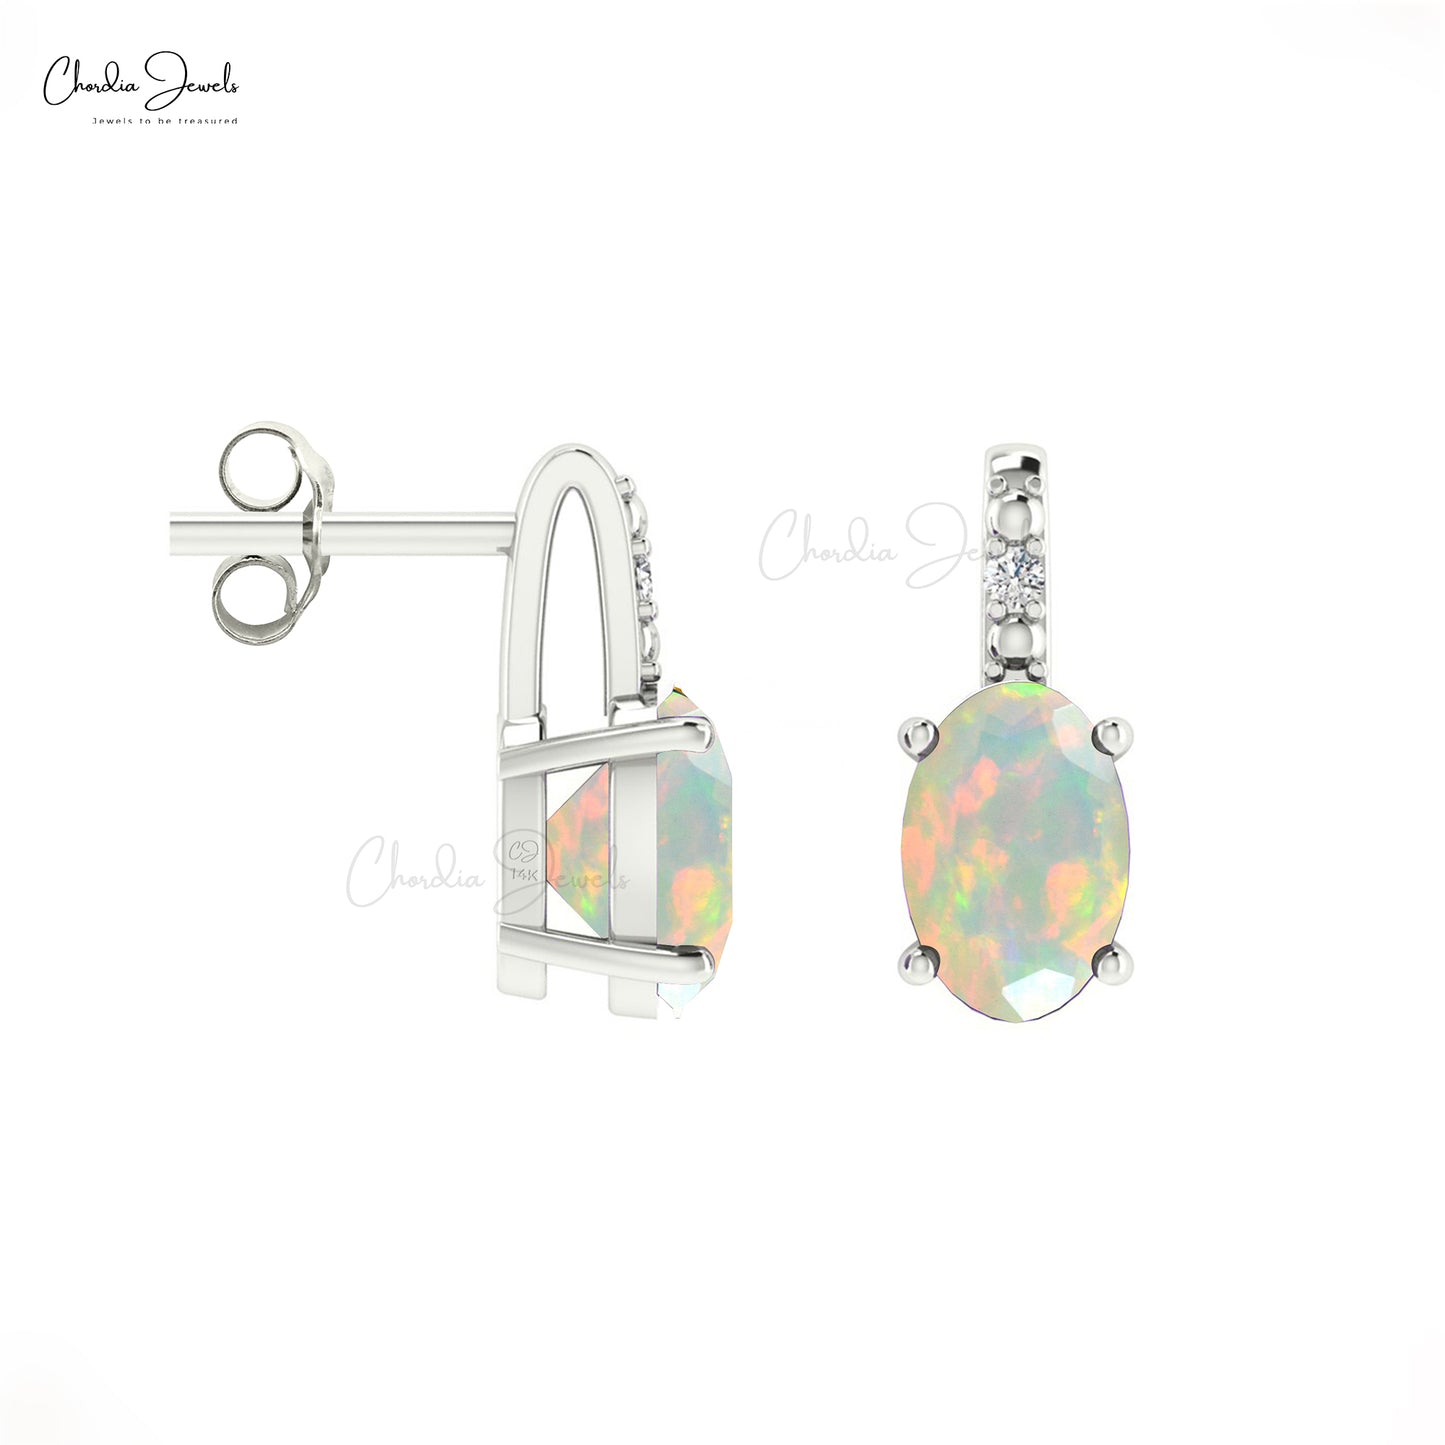 Load image into Gallery viewer, Oval Ethiopian Opal &amp;amp; Diamond 14K Gold Earrings 100% Natural
